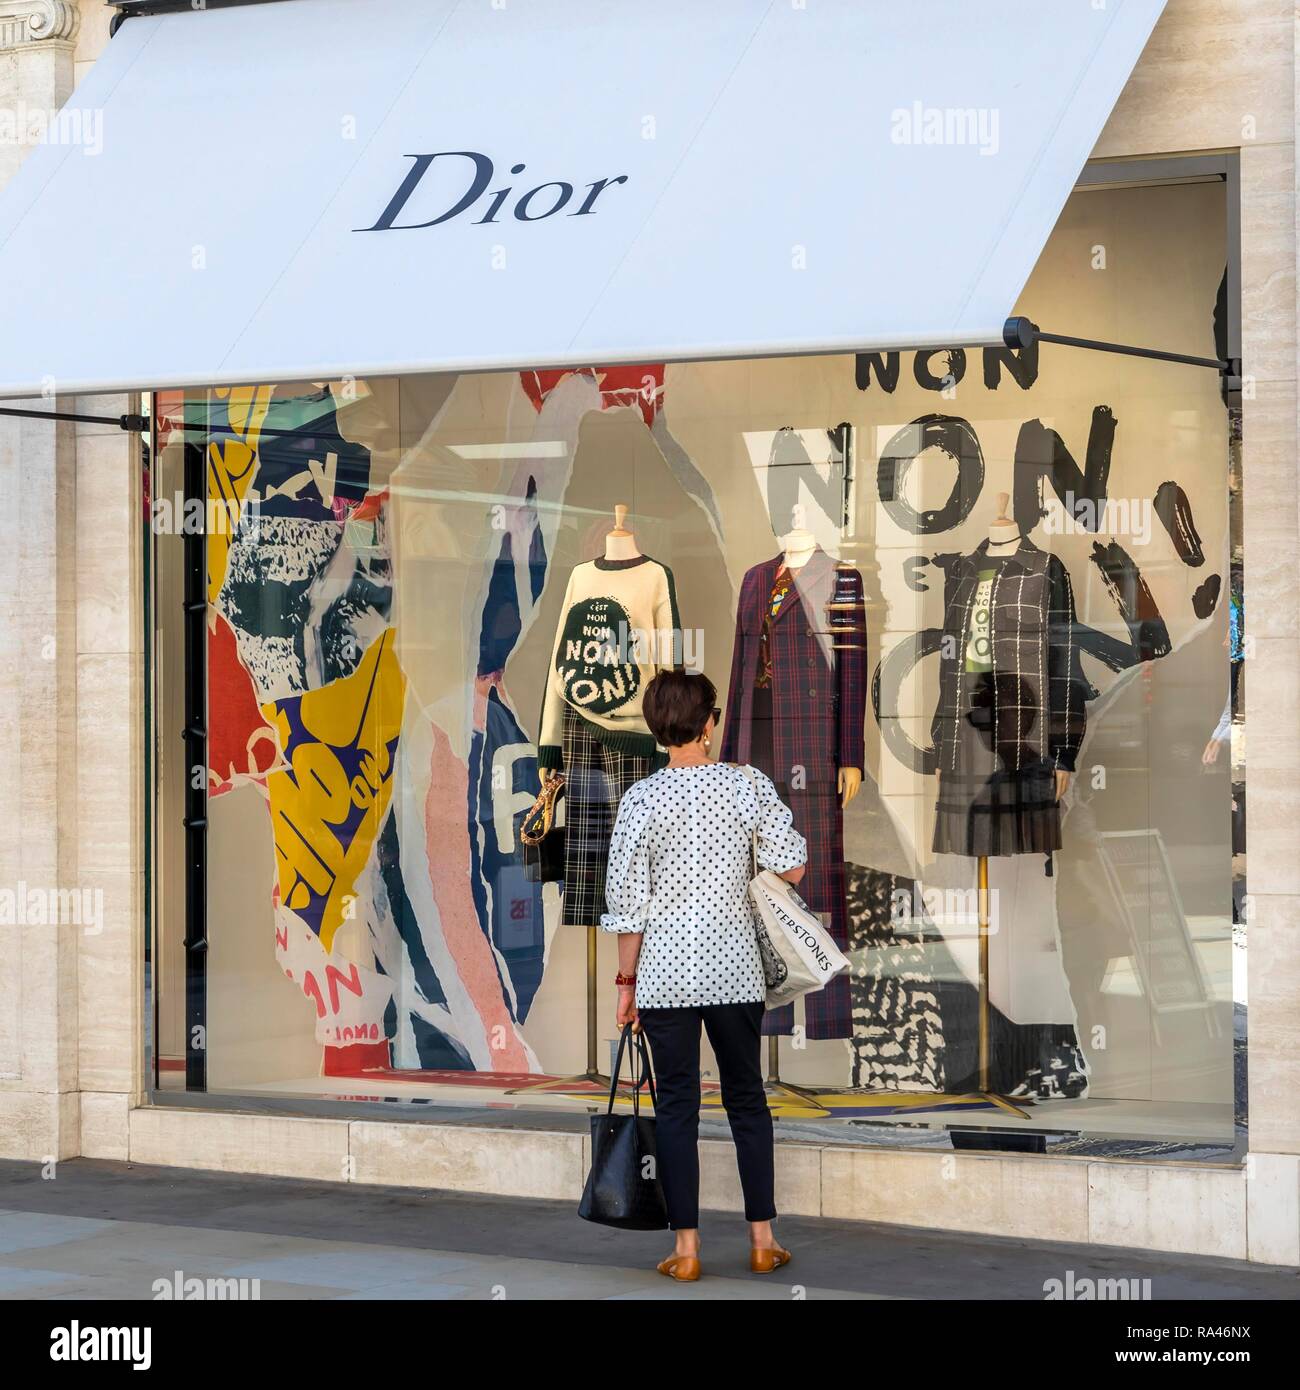 Passer-by in front of shop window, fashion shop Dior, London, United Kingdom Stock Photo